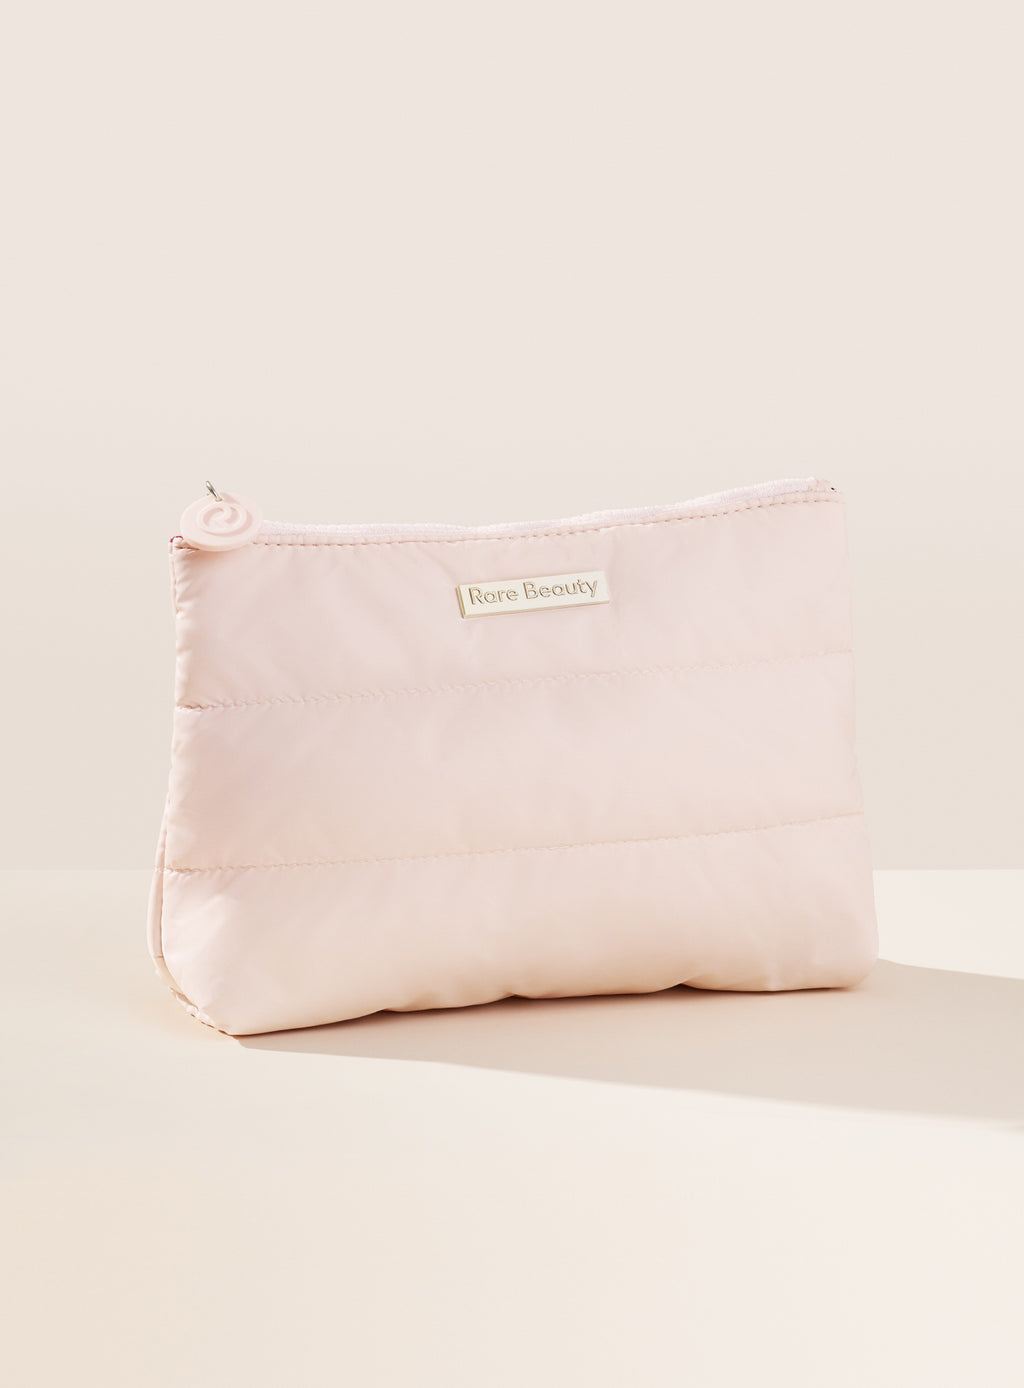 19 Of The Best Makeup And Cosmetic Bags You Can Get On